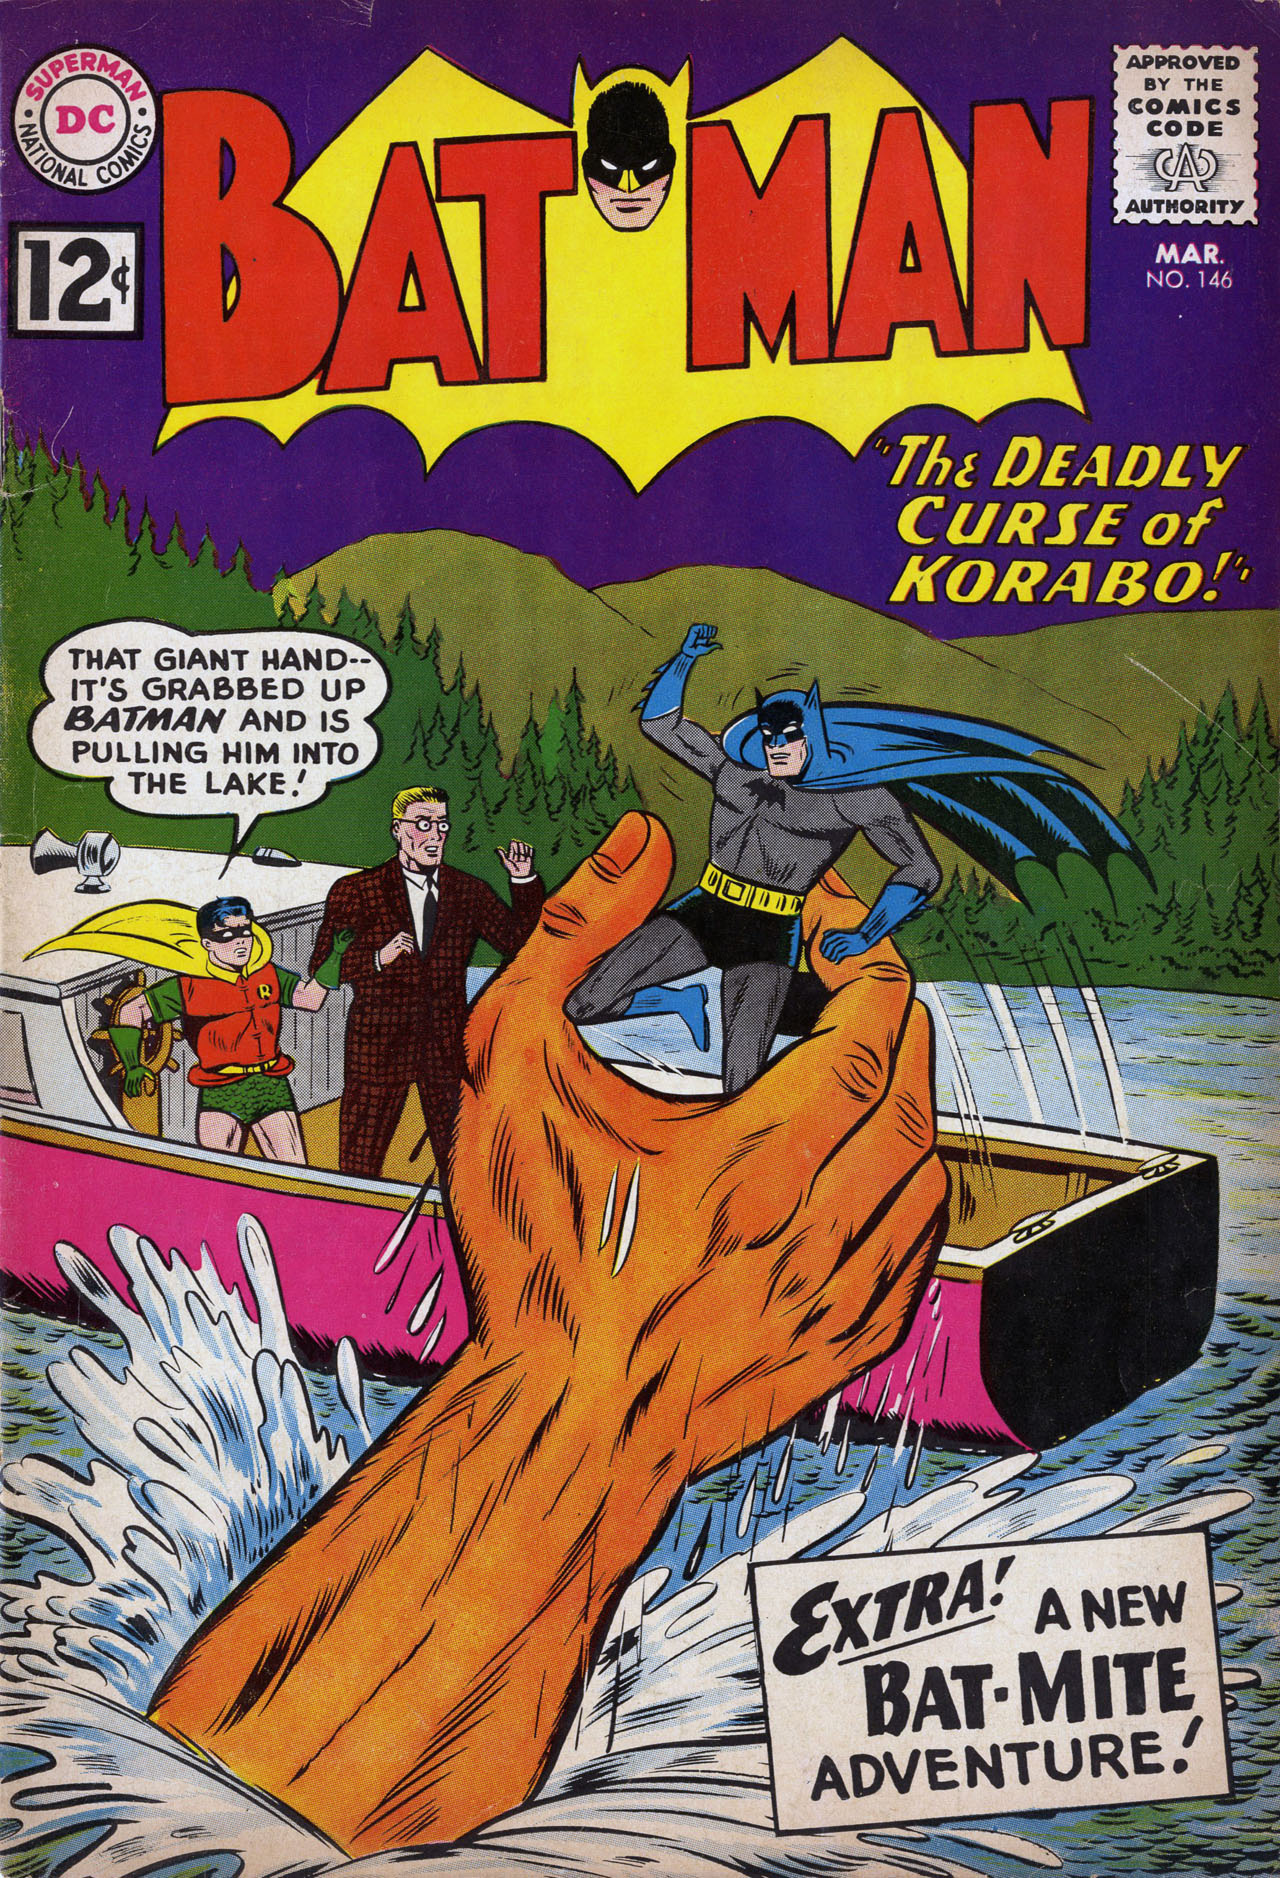 Batman 1940 Issue 146 | Read Batman 1940 Issue 146 comic online in high  quality. Read Full Comic online for free - Read comics online in high  quality .|